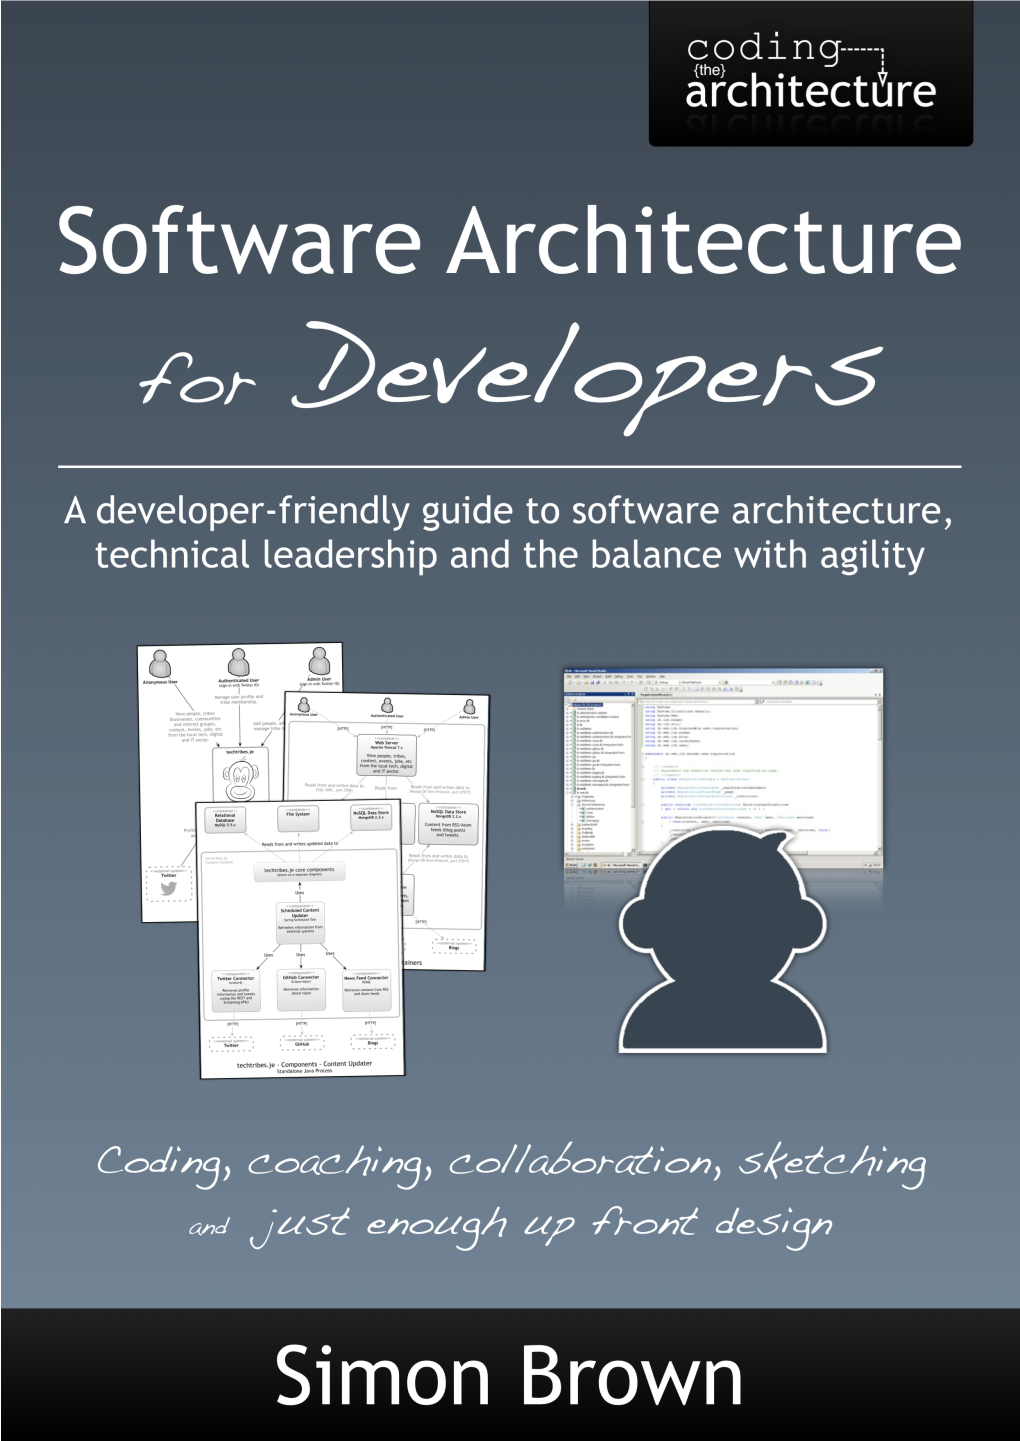 Software Architecture for Developers a Developer-Friendly Guide to Software Architecture, Technical Leadership and the Balance with Agility